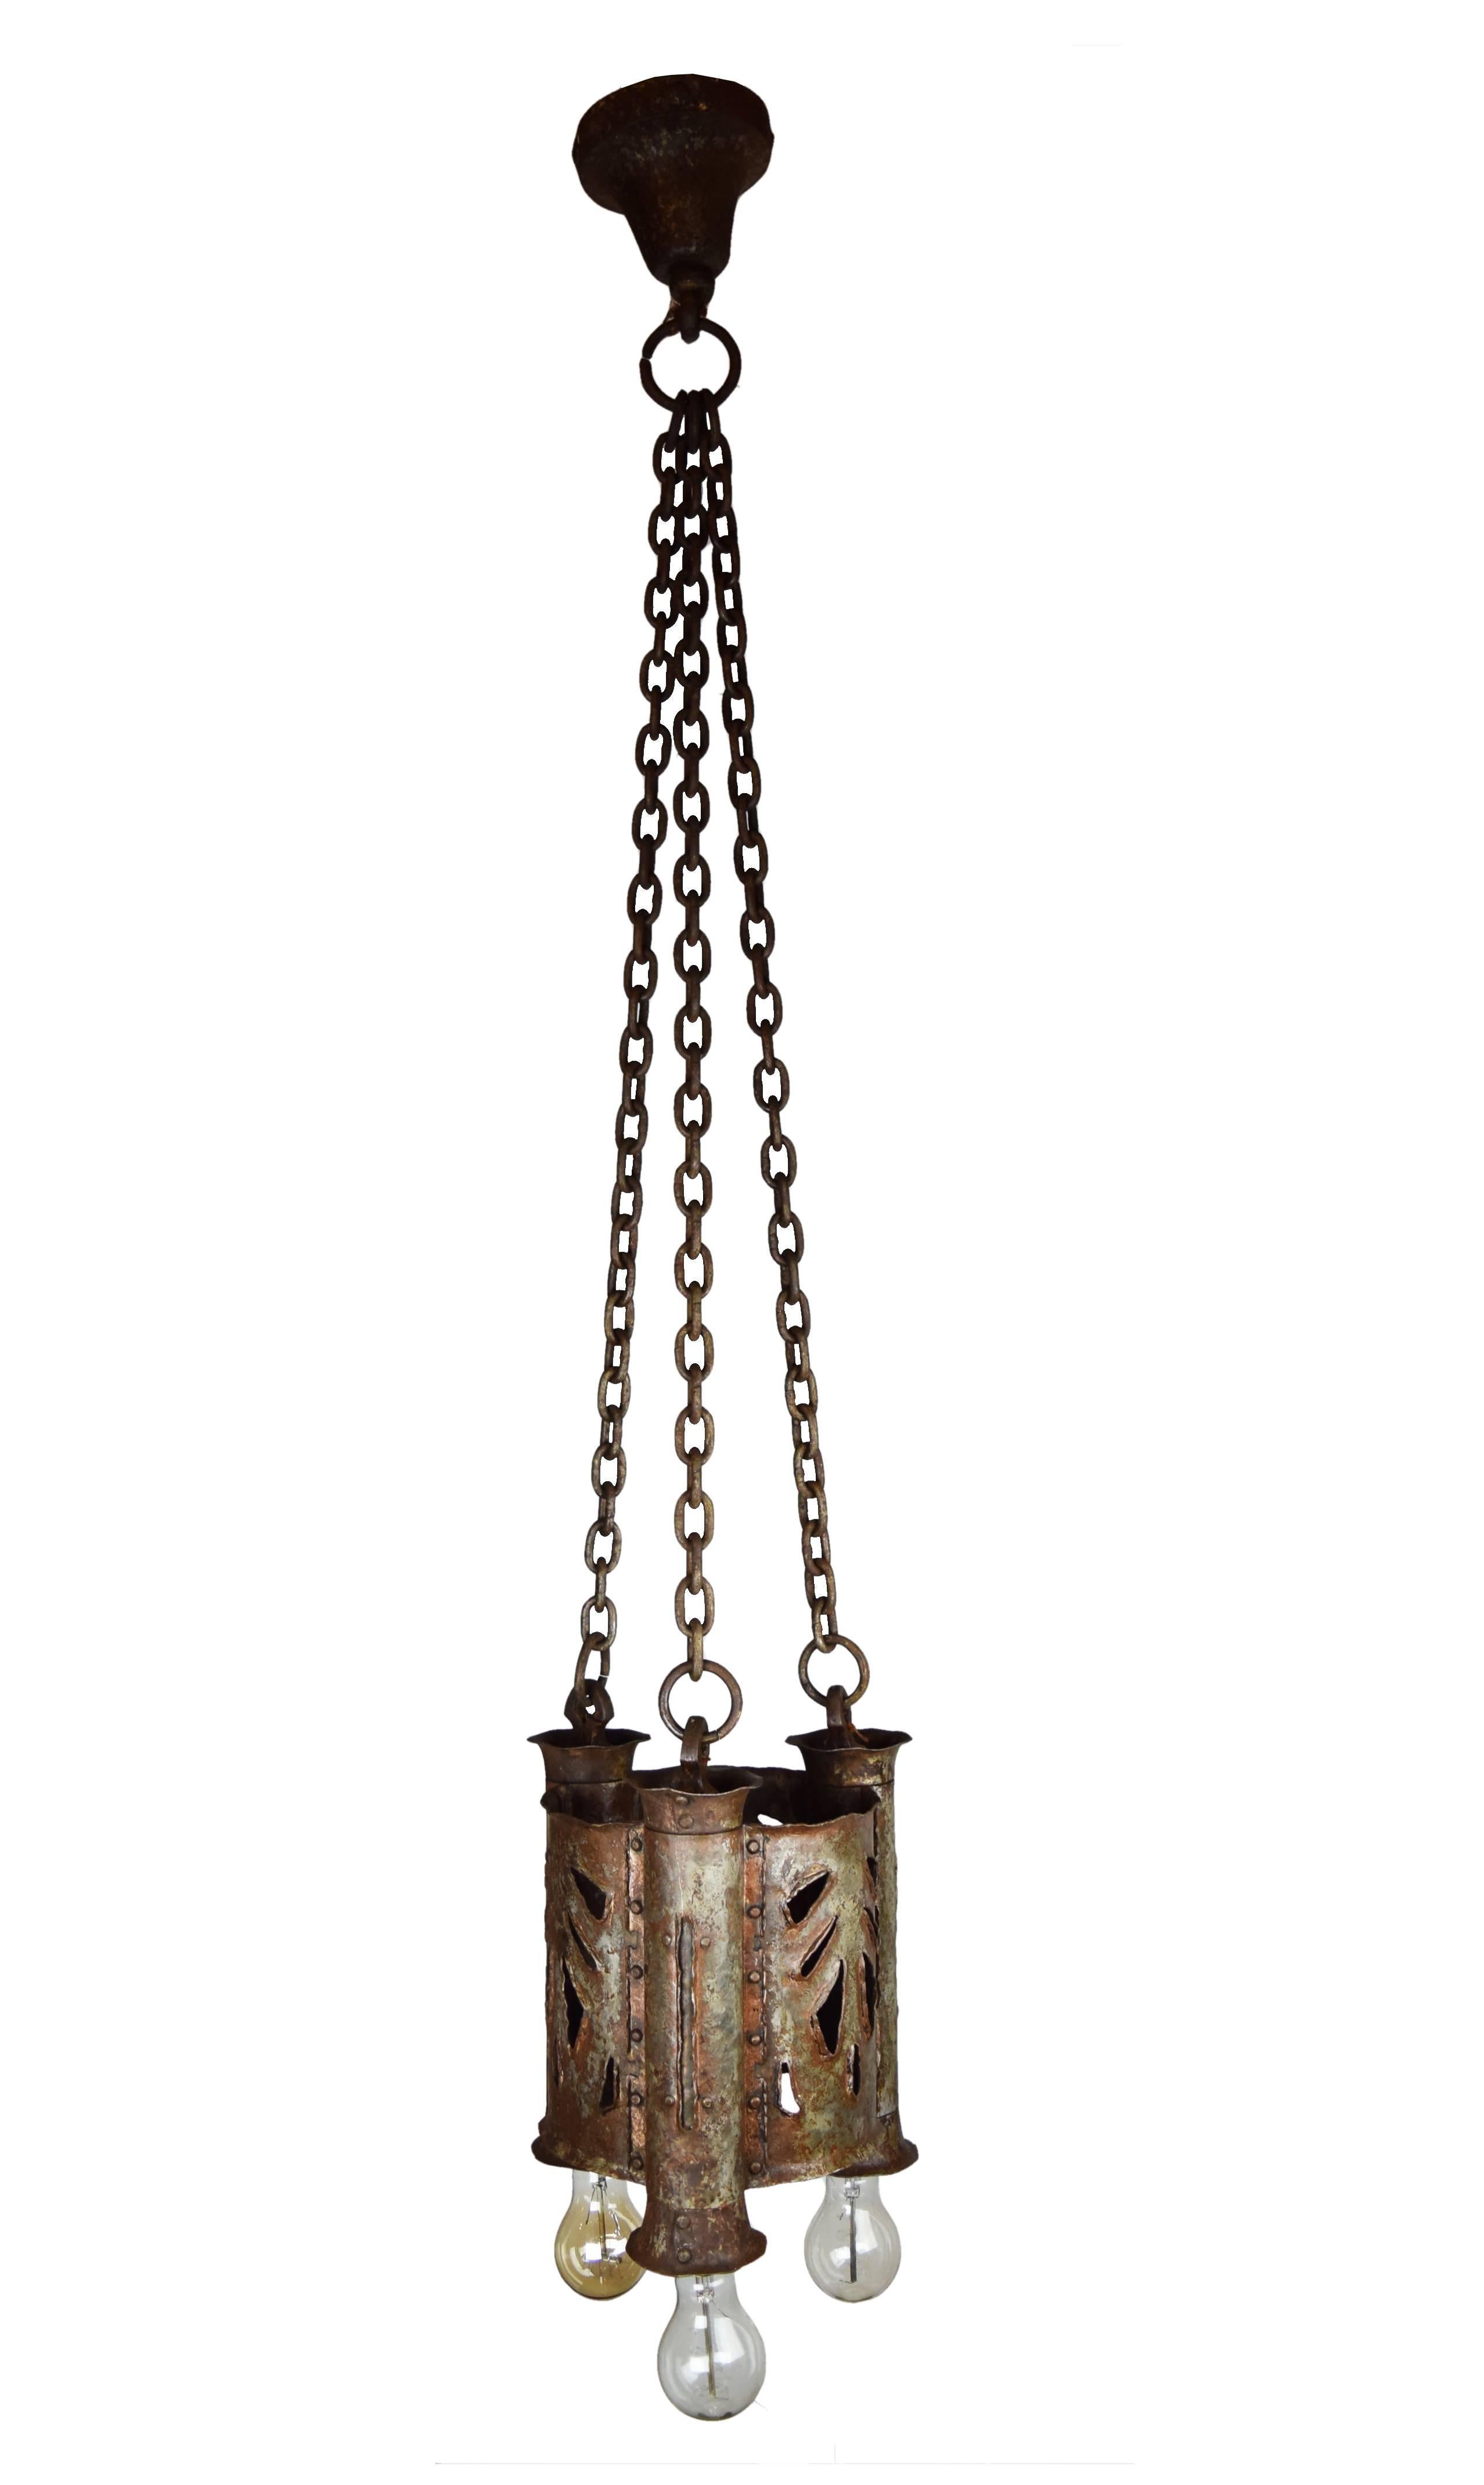 This wonderful Gothic iron three-light cylindrical pendant feature a unique cut-out design on all three faces of the fixture, a beautifully textured and hammered finish throughout, and its overall unique shape, style, and look would make them a